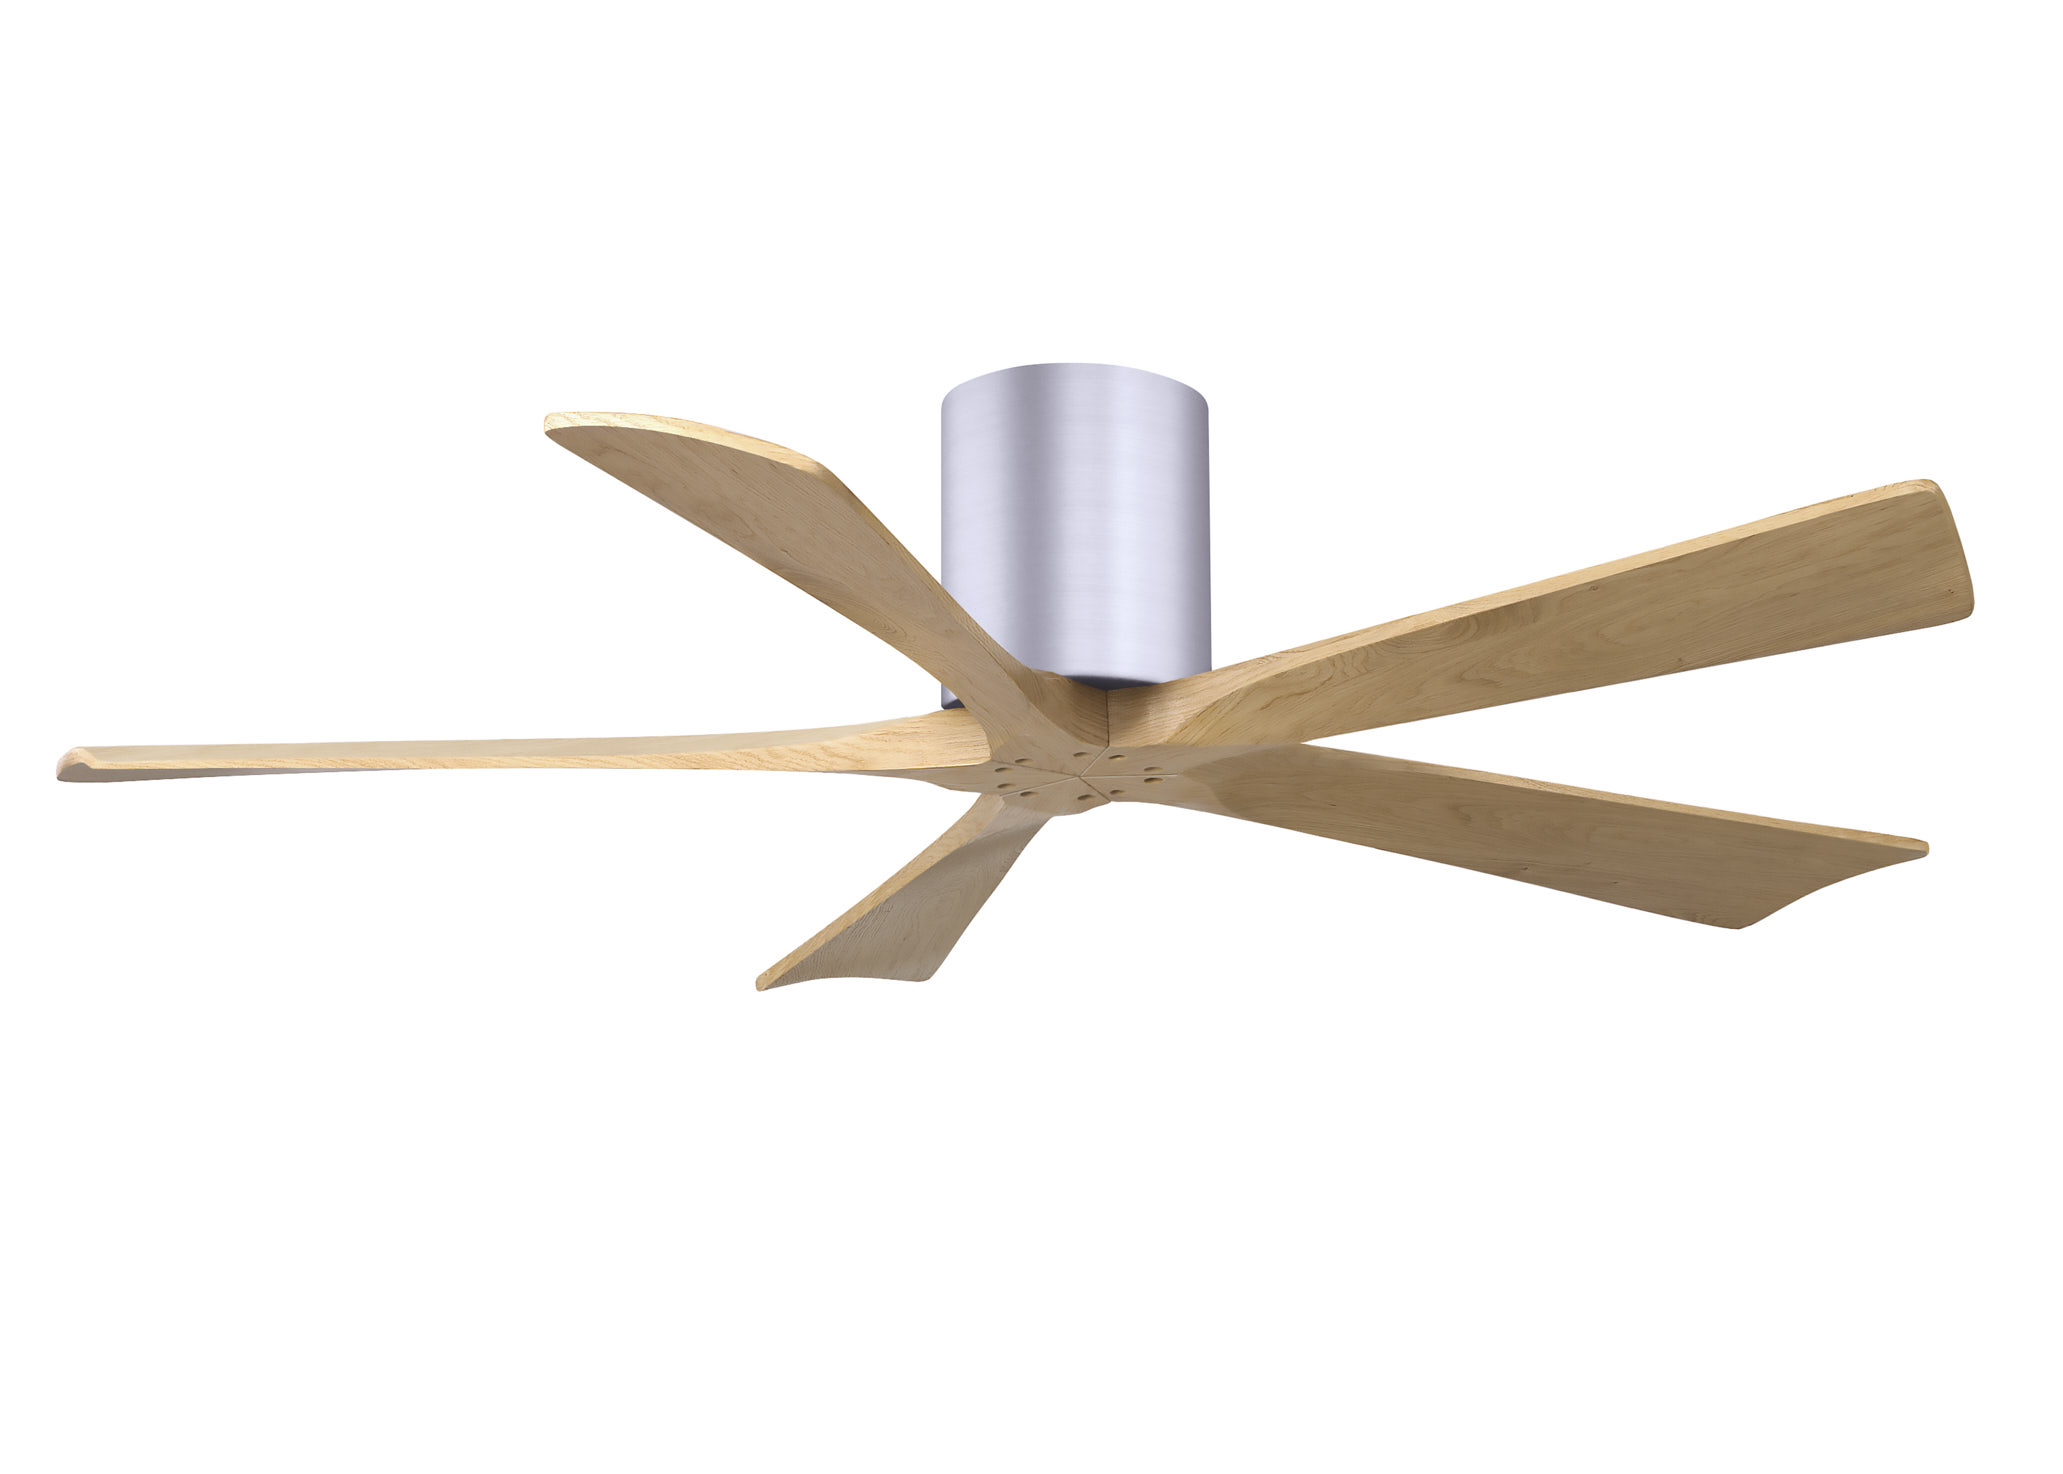 Irene-5H 6-speed ceiling fan in brushed nickel finish with 52